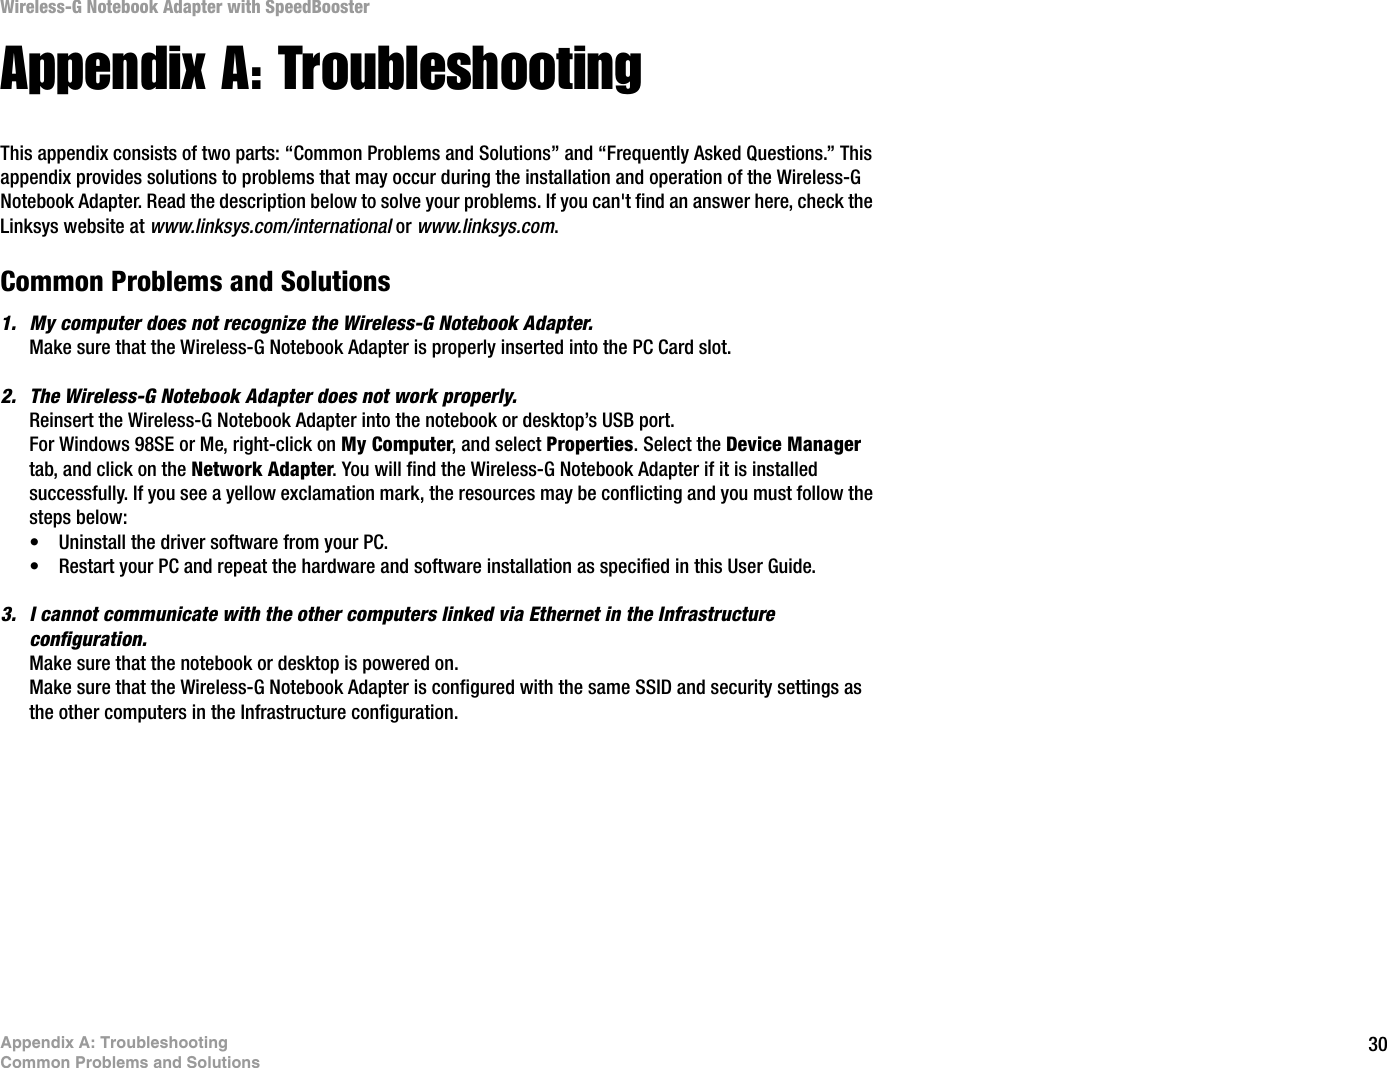 30Appendix A: TroubleshootingCommon Problems and SolutionsWireless-G Notebook Adapter with SpeedBoosterAppendix A: TroubleshootingThis appendix consists of two parts: “Common Problems and Solutions” and “Frequently Asked Questions.” This appendix provides solutions to problems that may occur during the installation and operation of the Wireless-G Notebook Adapter. Read the description below to solve your problems. If you can&apos;t find an answer here, check the Linksys website at www.linksys.com/international or www.linksys.com.Common Problems and Solutions1. My computer does not recognize the Wireless-G Notebook Adapter.Make sure that the Wireless-G Notebook Adapter is properly inserted into the PC Card slot.2. The Wireless-G Notebook Adapter does not work properly.Reinsert the Wireless-G Notebook Adapter into the notebook or desktop’s USB port. For Windows 98SE or Me, right-click on My Computer, and select Properties. Select the Device Managertab, and click on the Network Adapter. You will find the Wireless-G Notebook Adapter if it is installed successfully. If you see a yellow exclamation mark, the resources may be conflicting and you must follow the steps below:• Uninstall the driver software from your PC.• Restart your PC and repeat the hardware and software installation as specified in this User Guide.3. I cannot communicate with the other computers linked via Ethernet in the Infrastructure configuration.Make sure that the notebook or desktop is powered on.Make sure that the Wireless-G Notebook Adapter is configured with the same SSID and security settings as the other computers in the Infrastructure configuration.